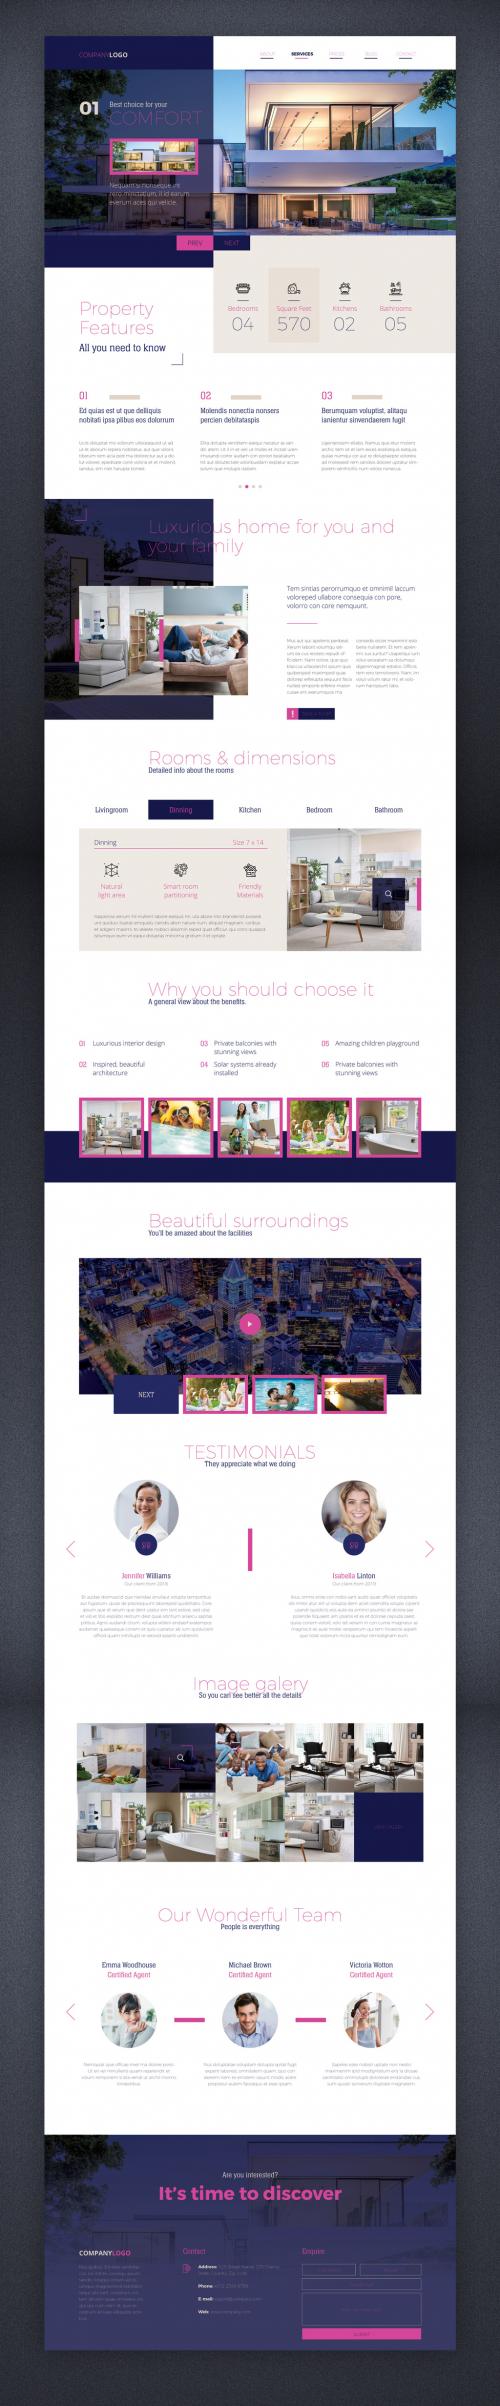 Real Estate Agency Website with Blue and Pink Accents - 451617336